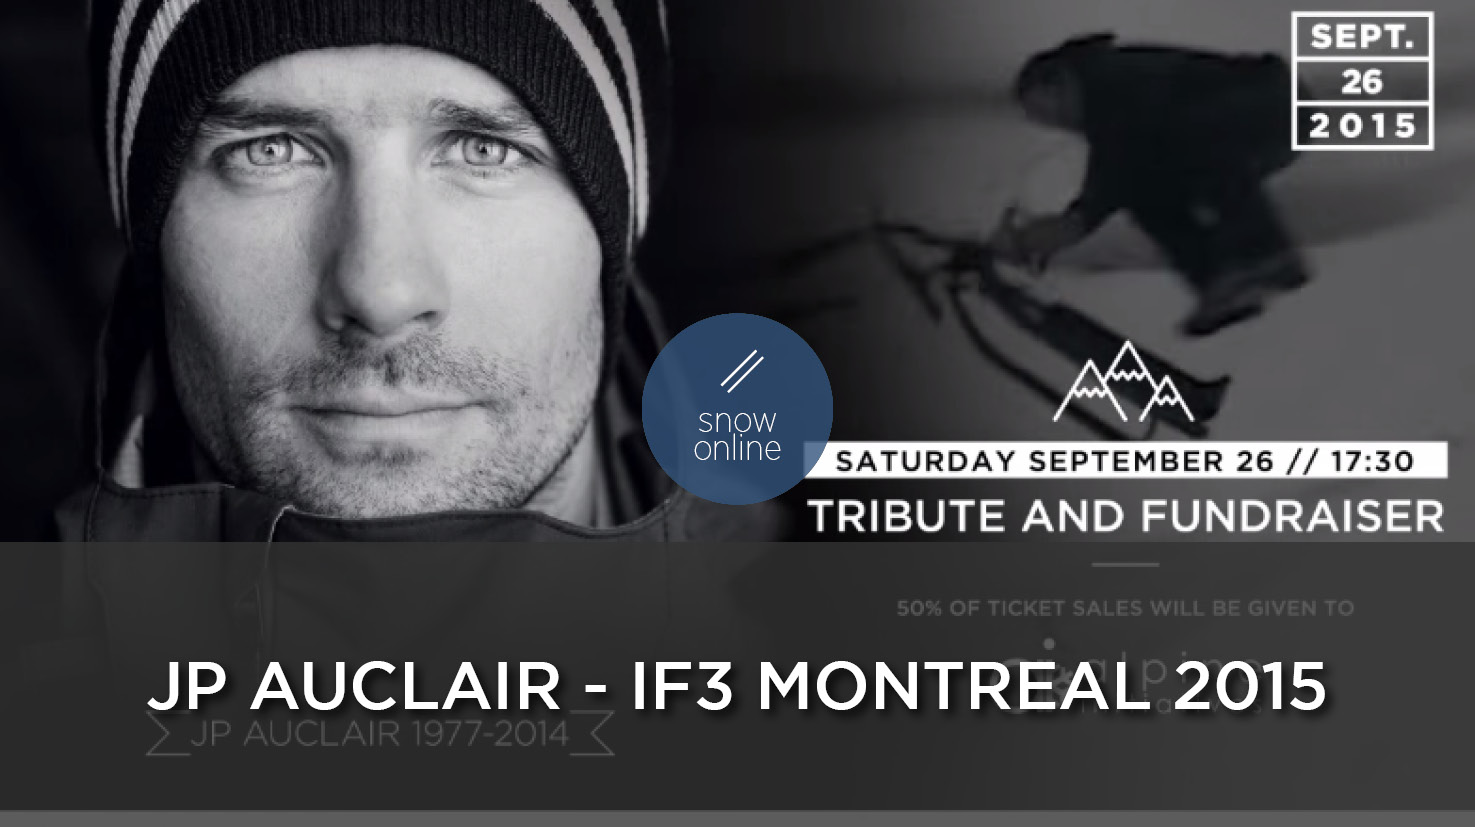 JP Auclair - iF3 Montreal 2015